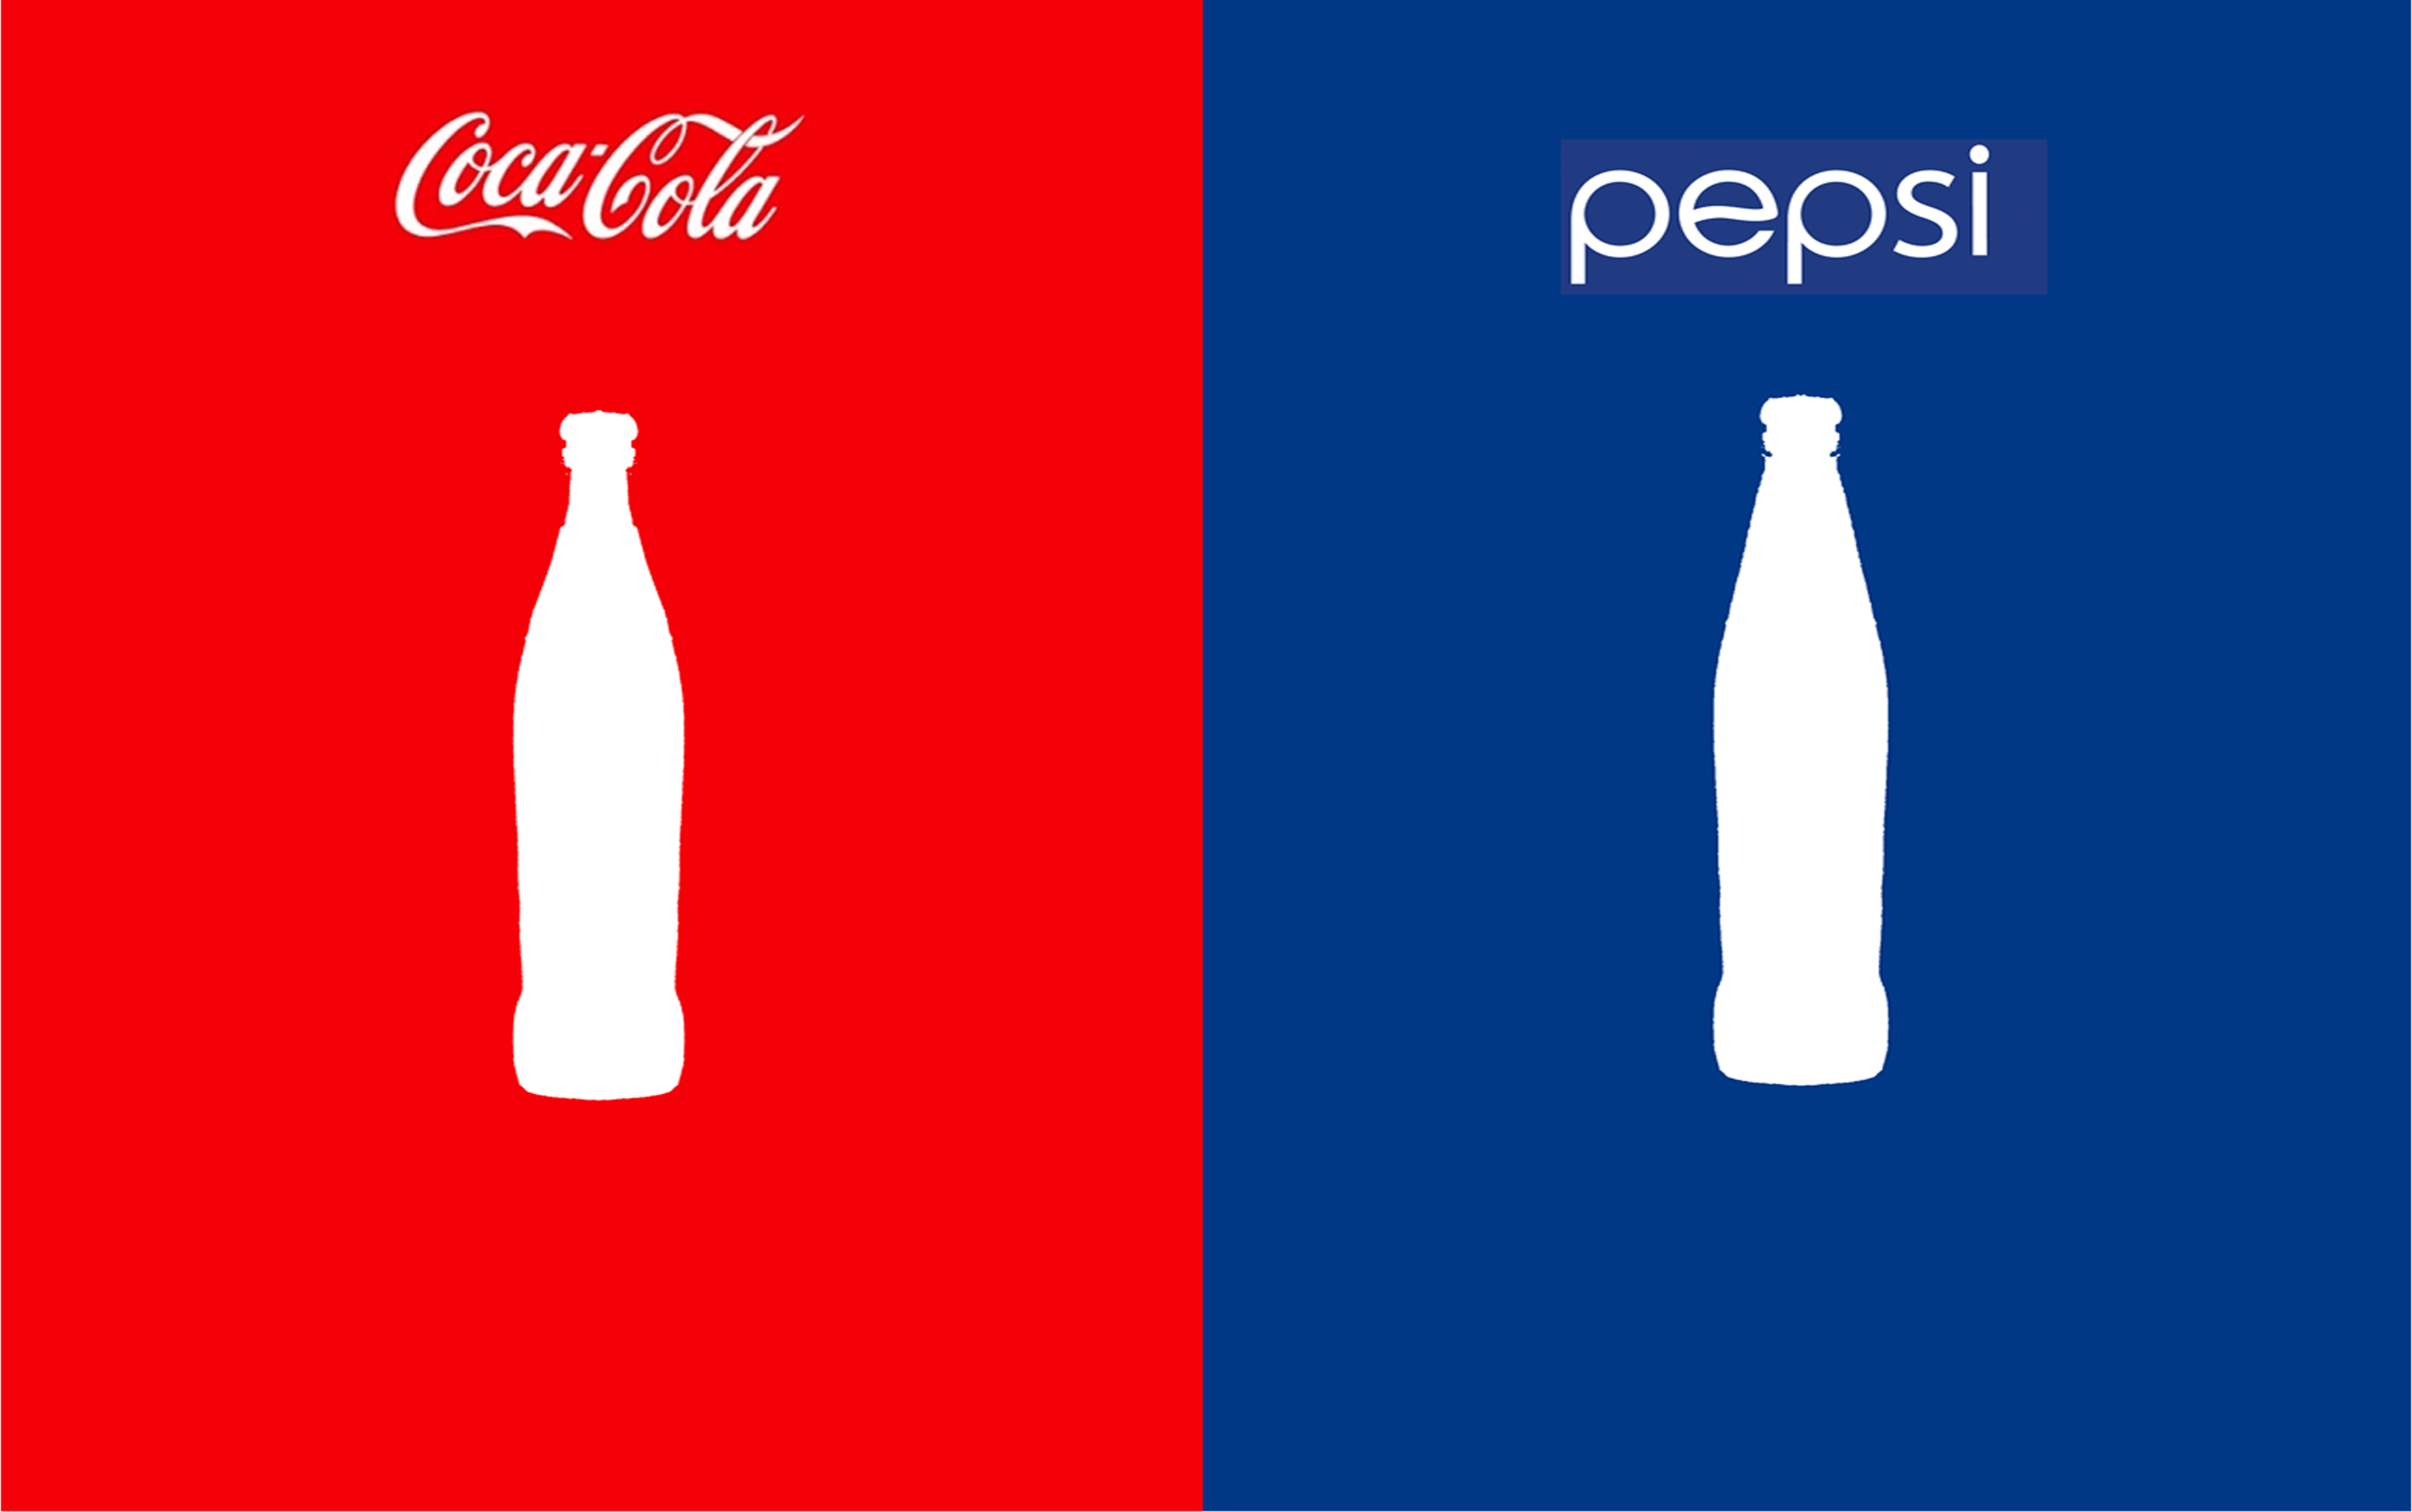 Pepsi and Coke - Image from Feebbo